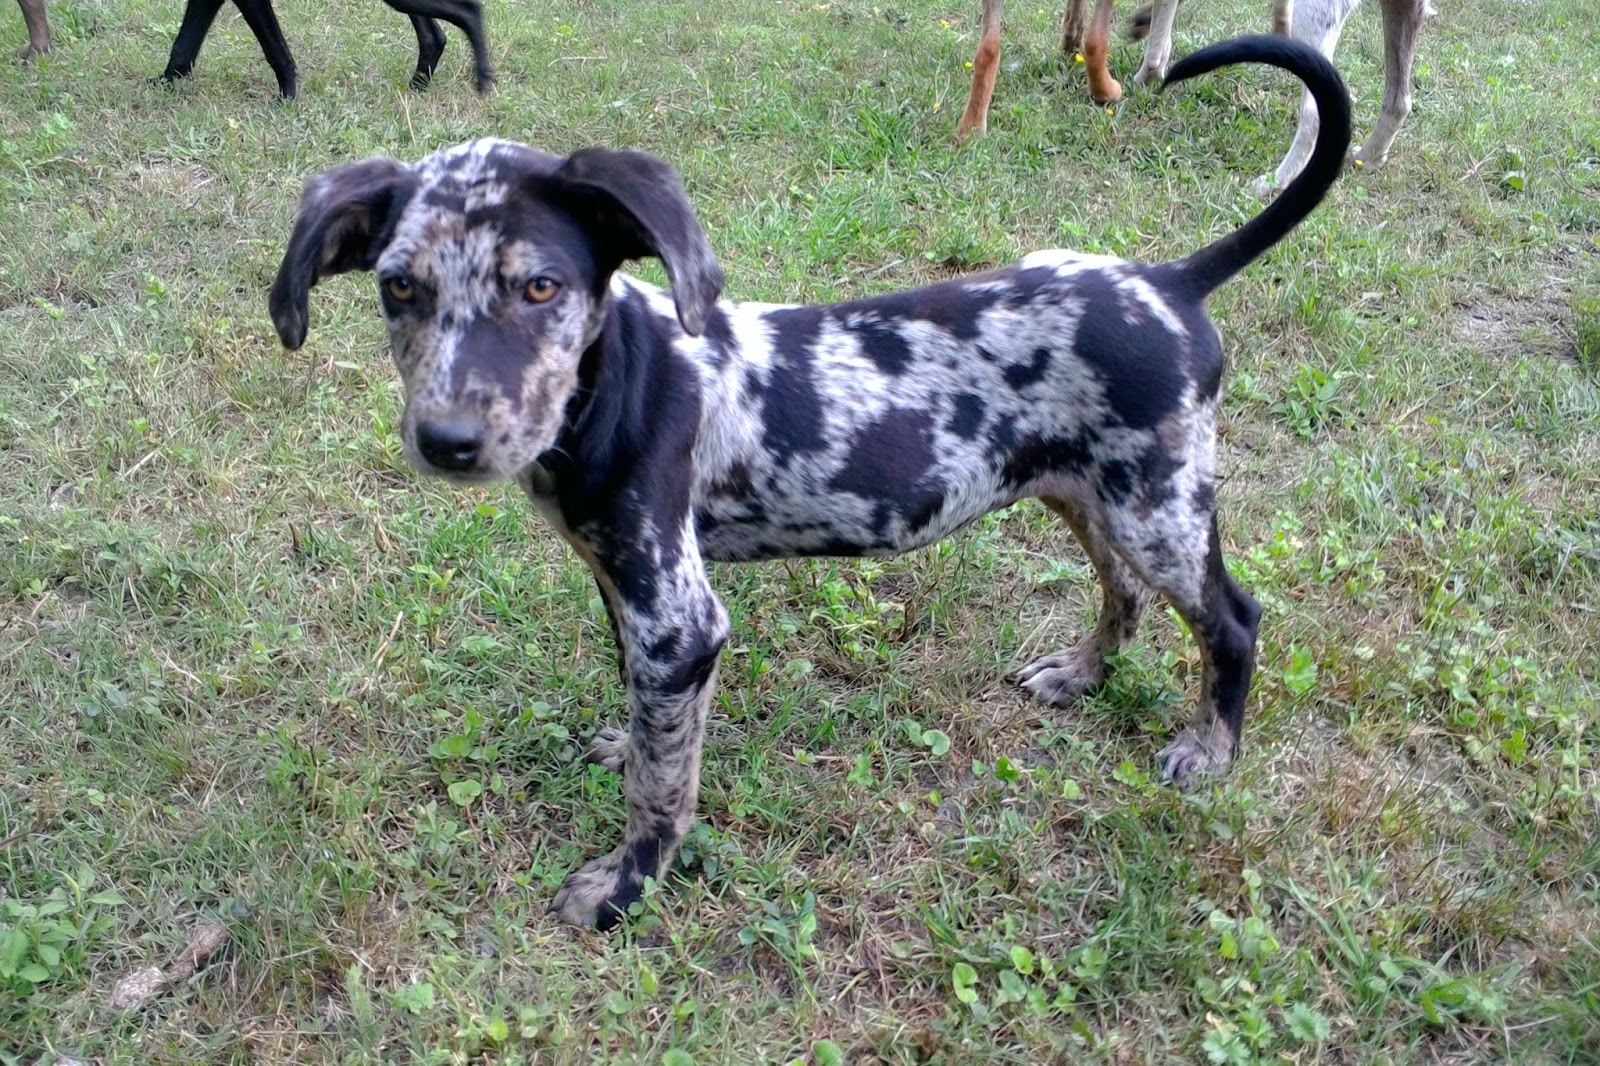 Catahoula Puppies: Louisiana Catahoula Puppies for sale, 4-6 month old